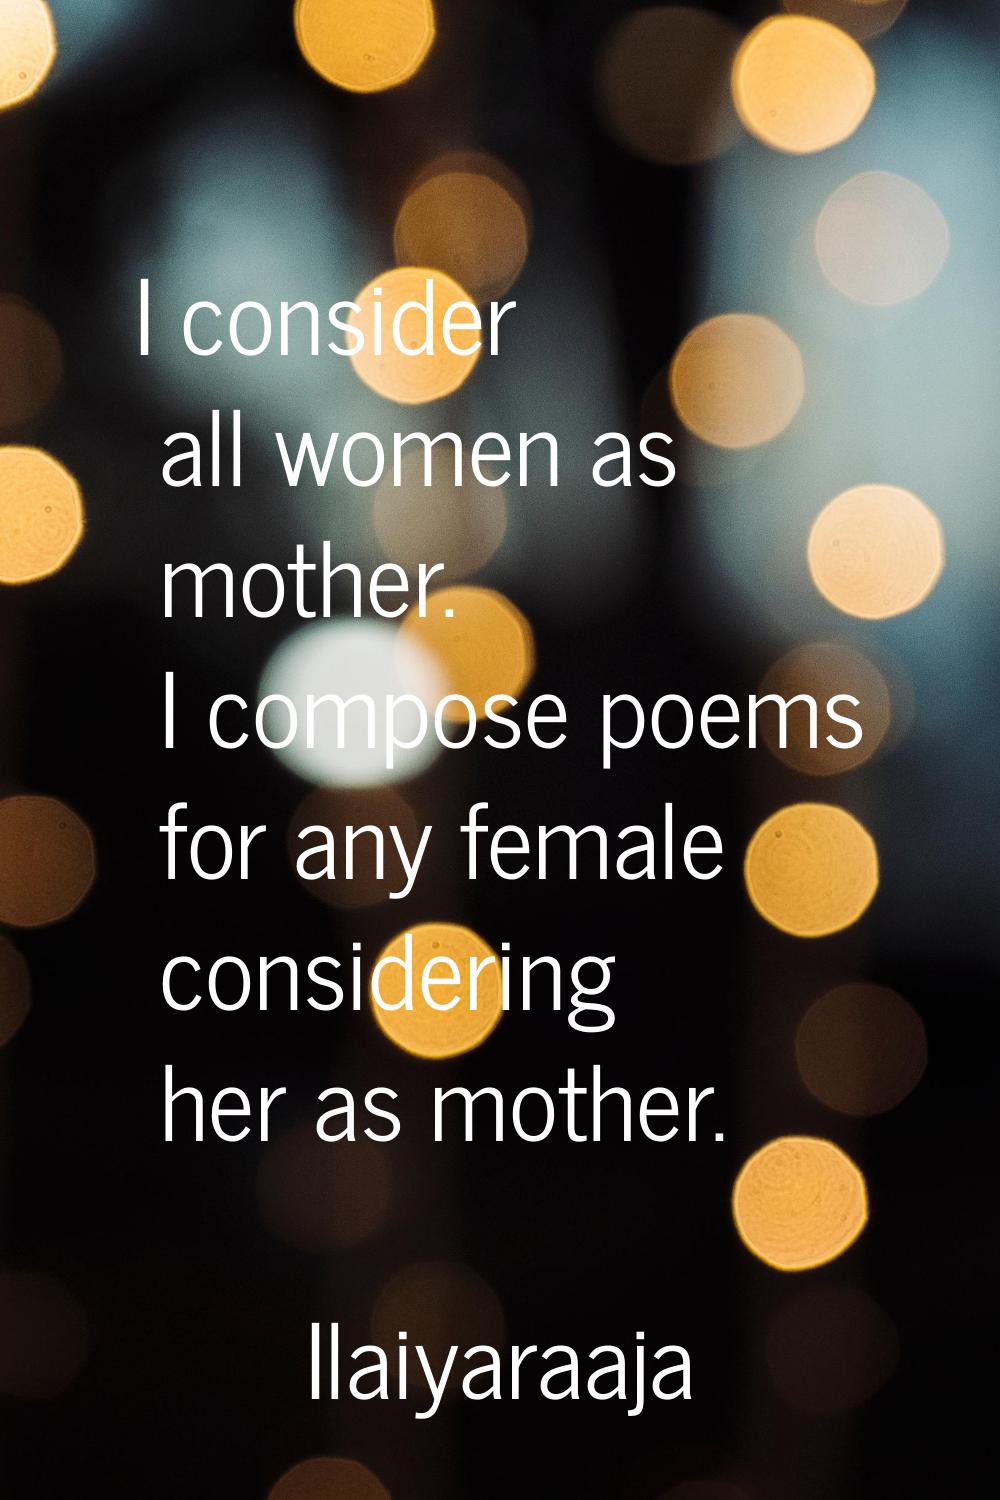 I consider all women as mother. I compose poems for any female considering her as mother.